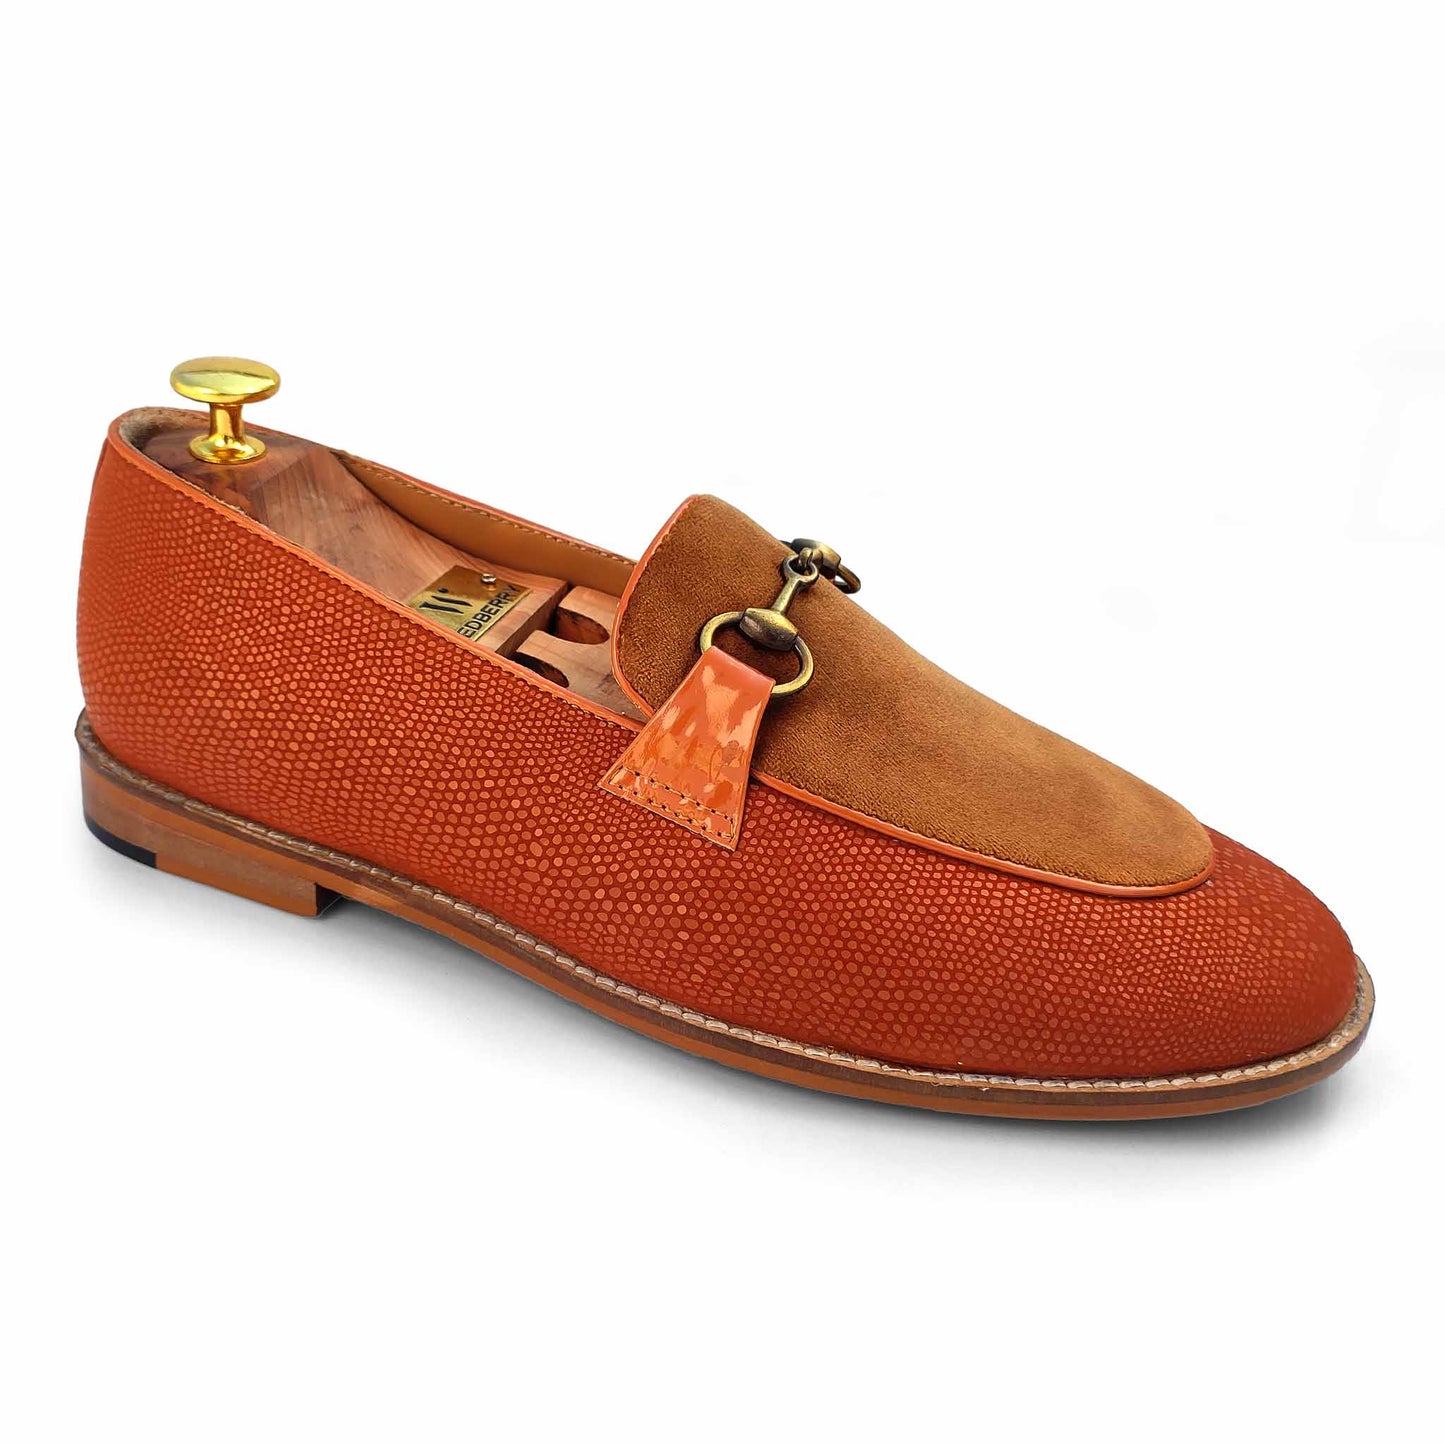 Tan Hugo Buckle Apron Wedding Ethnic Party Shoes Loafer for Men